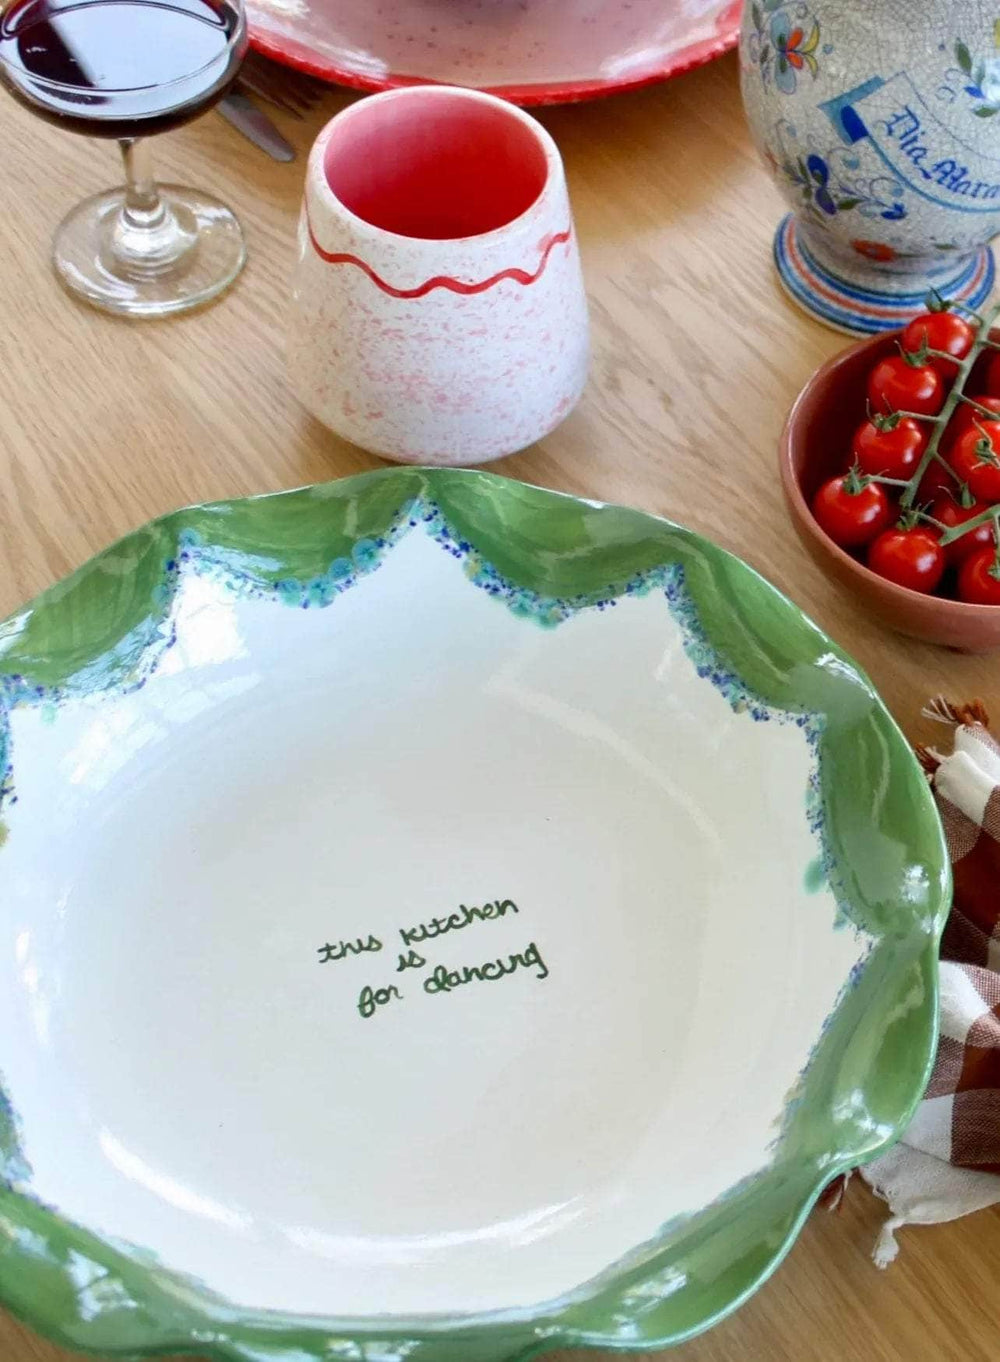 Hand-painted "this kitchen is for dancing" Scalloped Pasta Bowl